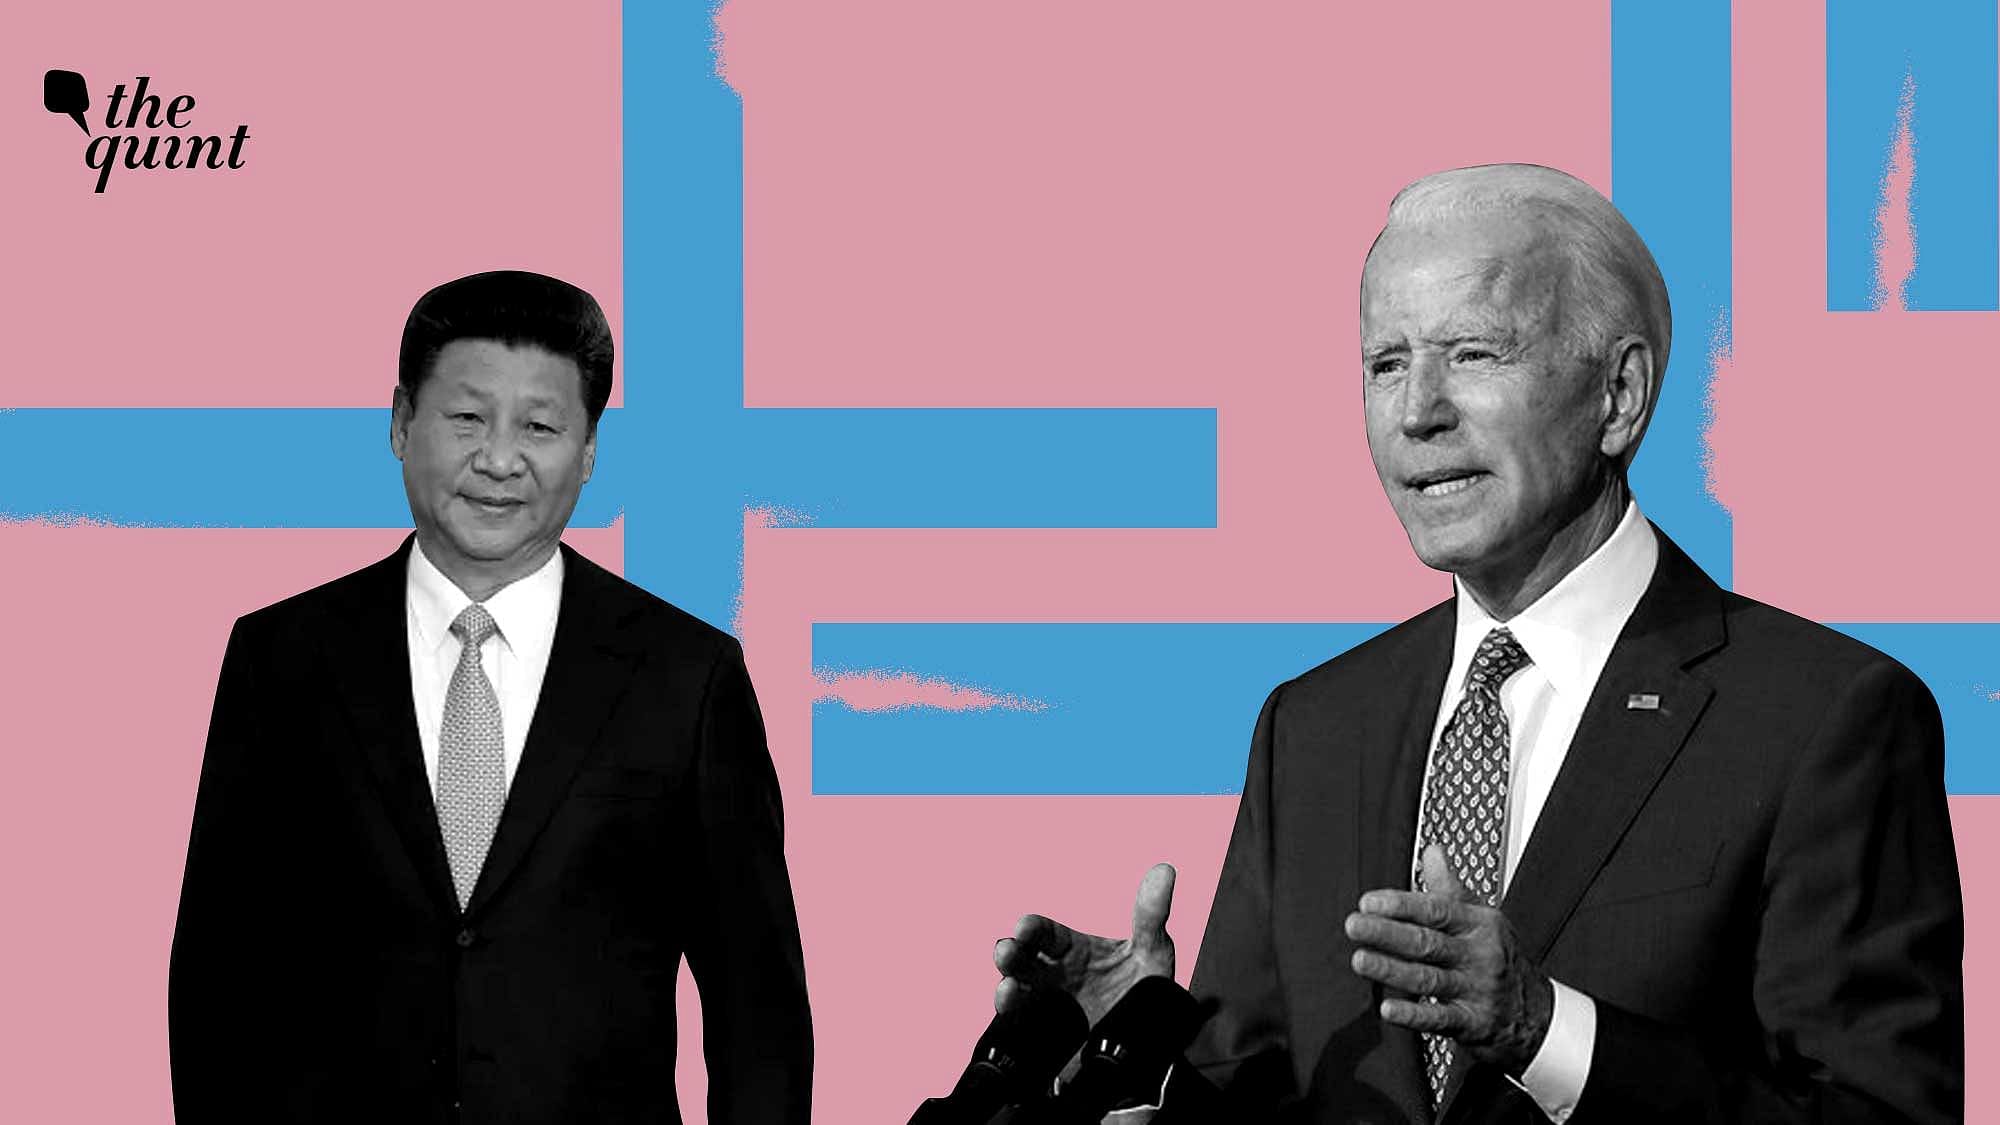 <div class="paragraphs"><p>United States President Joe Biden held a 90-minute long telephonic discussion with <a href="https://www.thequint.com/topic/china">Chinese President Xi Jinping</a> on Thursday, 9 September.</p></div>